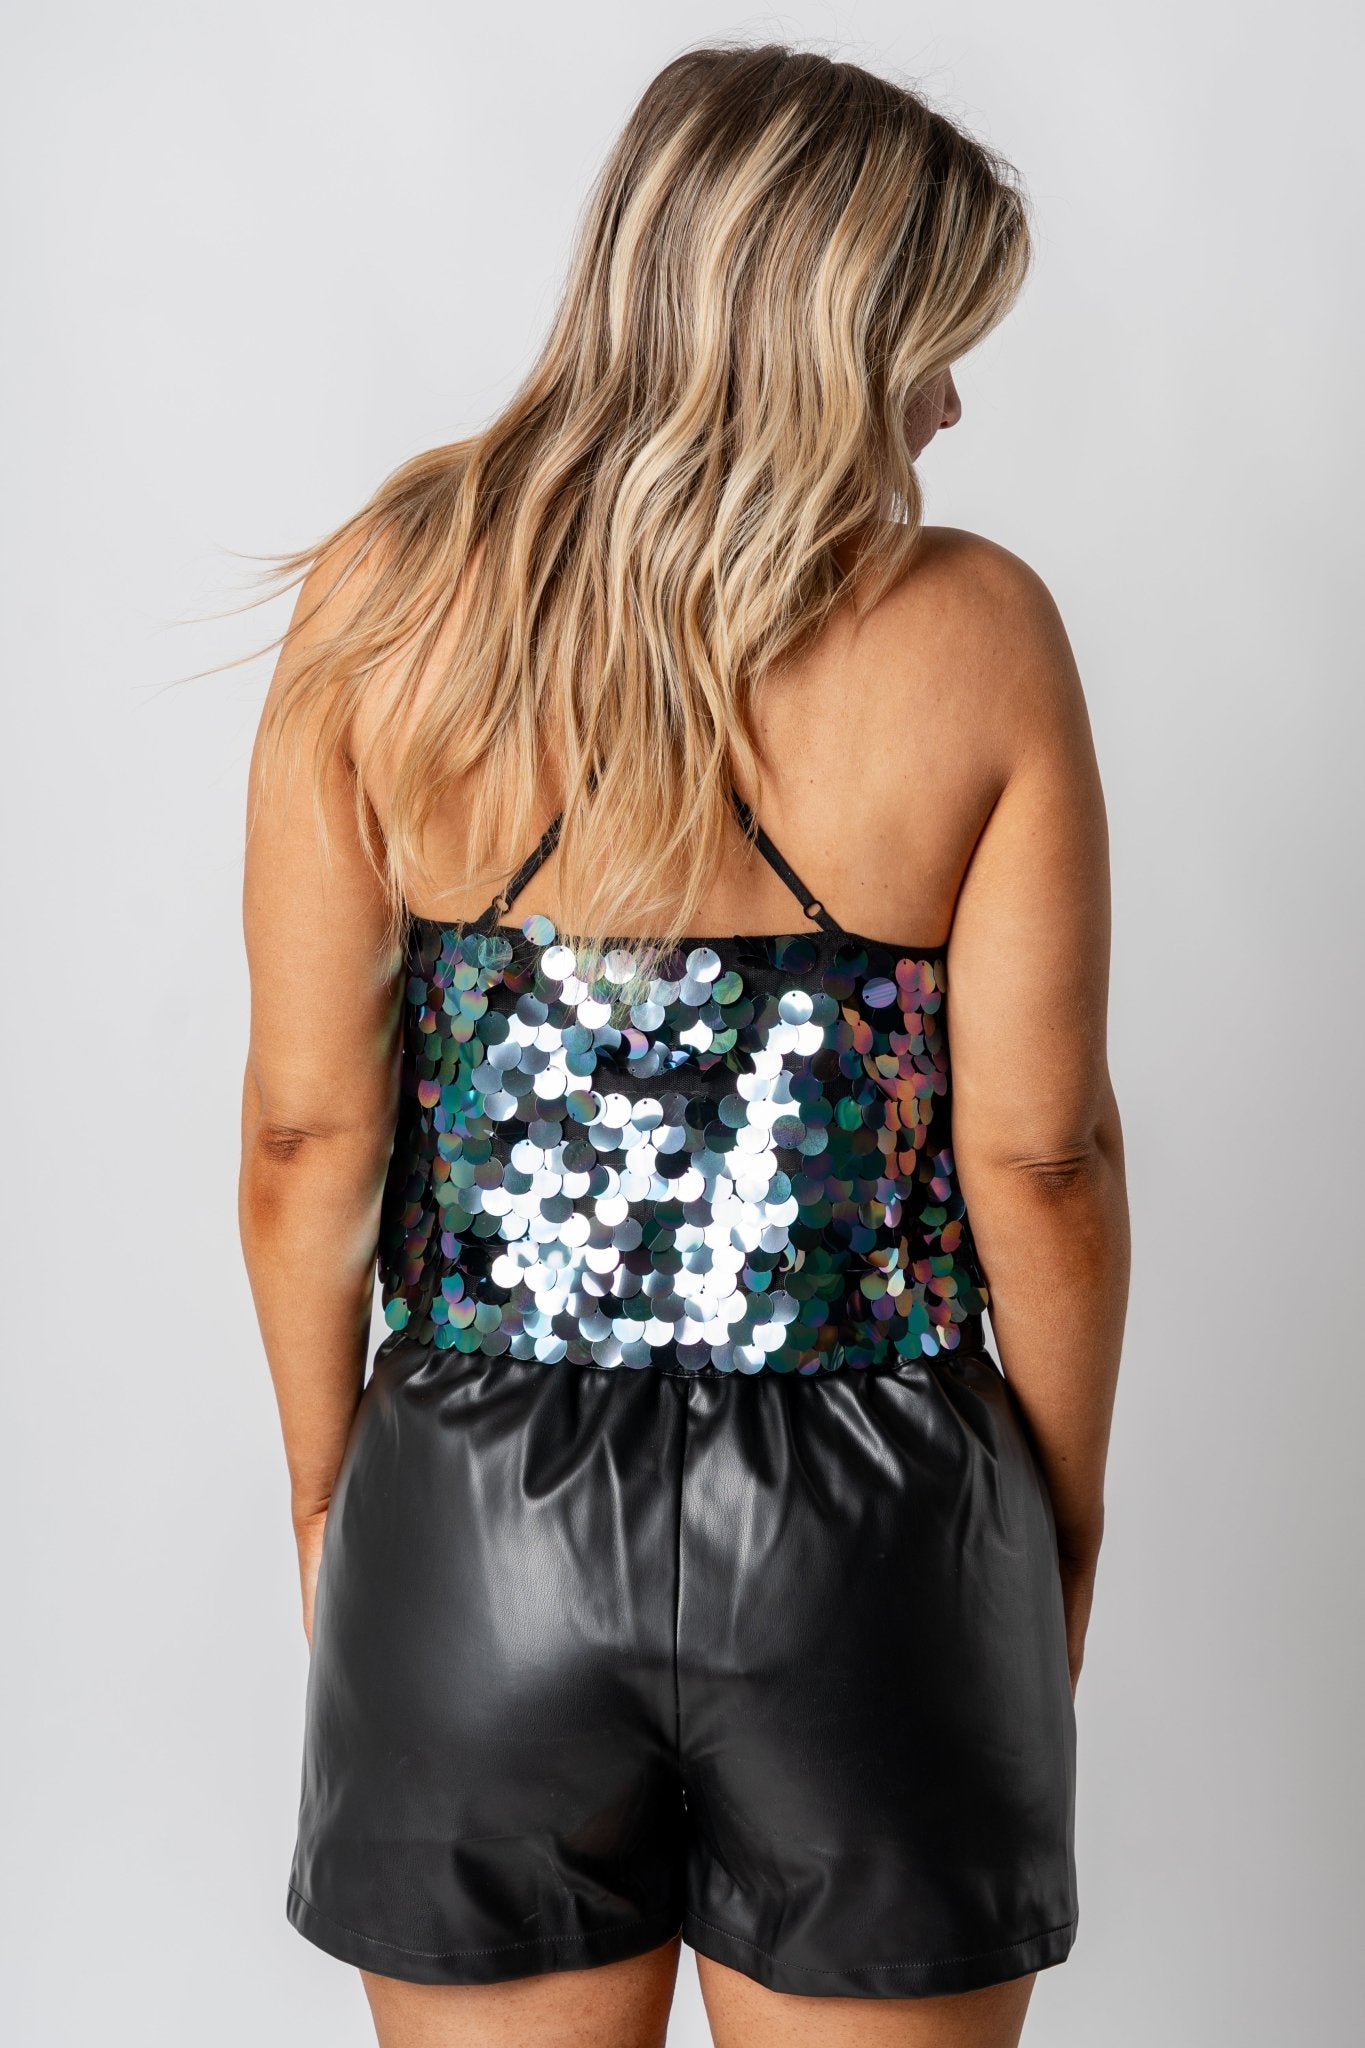 Sequin crop top black - Trendy New Year's Eve Dresses, Skirts, Kimonos and Sequins at Lush Fashion Lounge Boutique in Oklahoma City